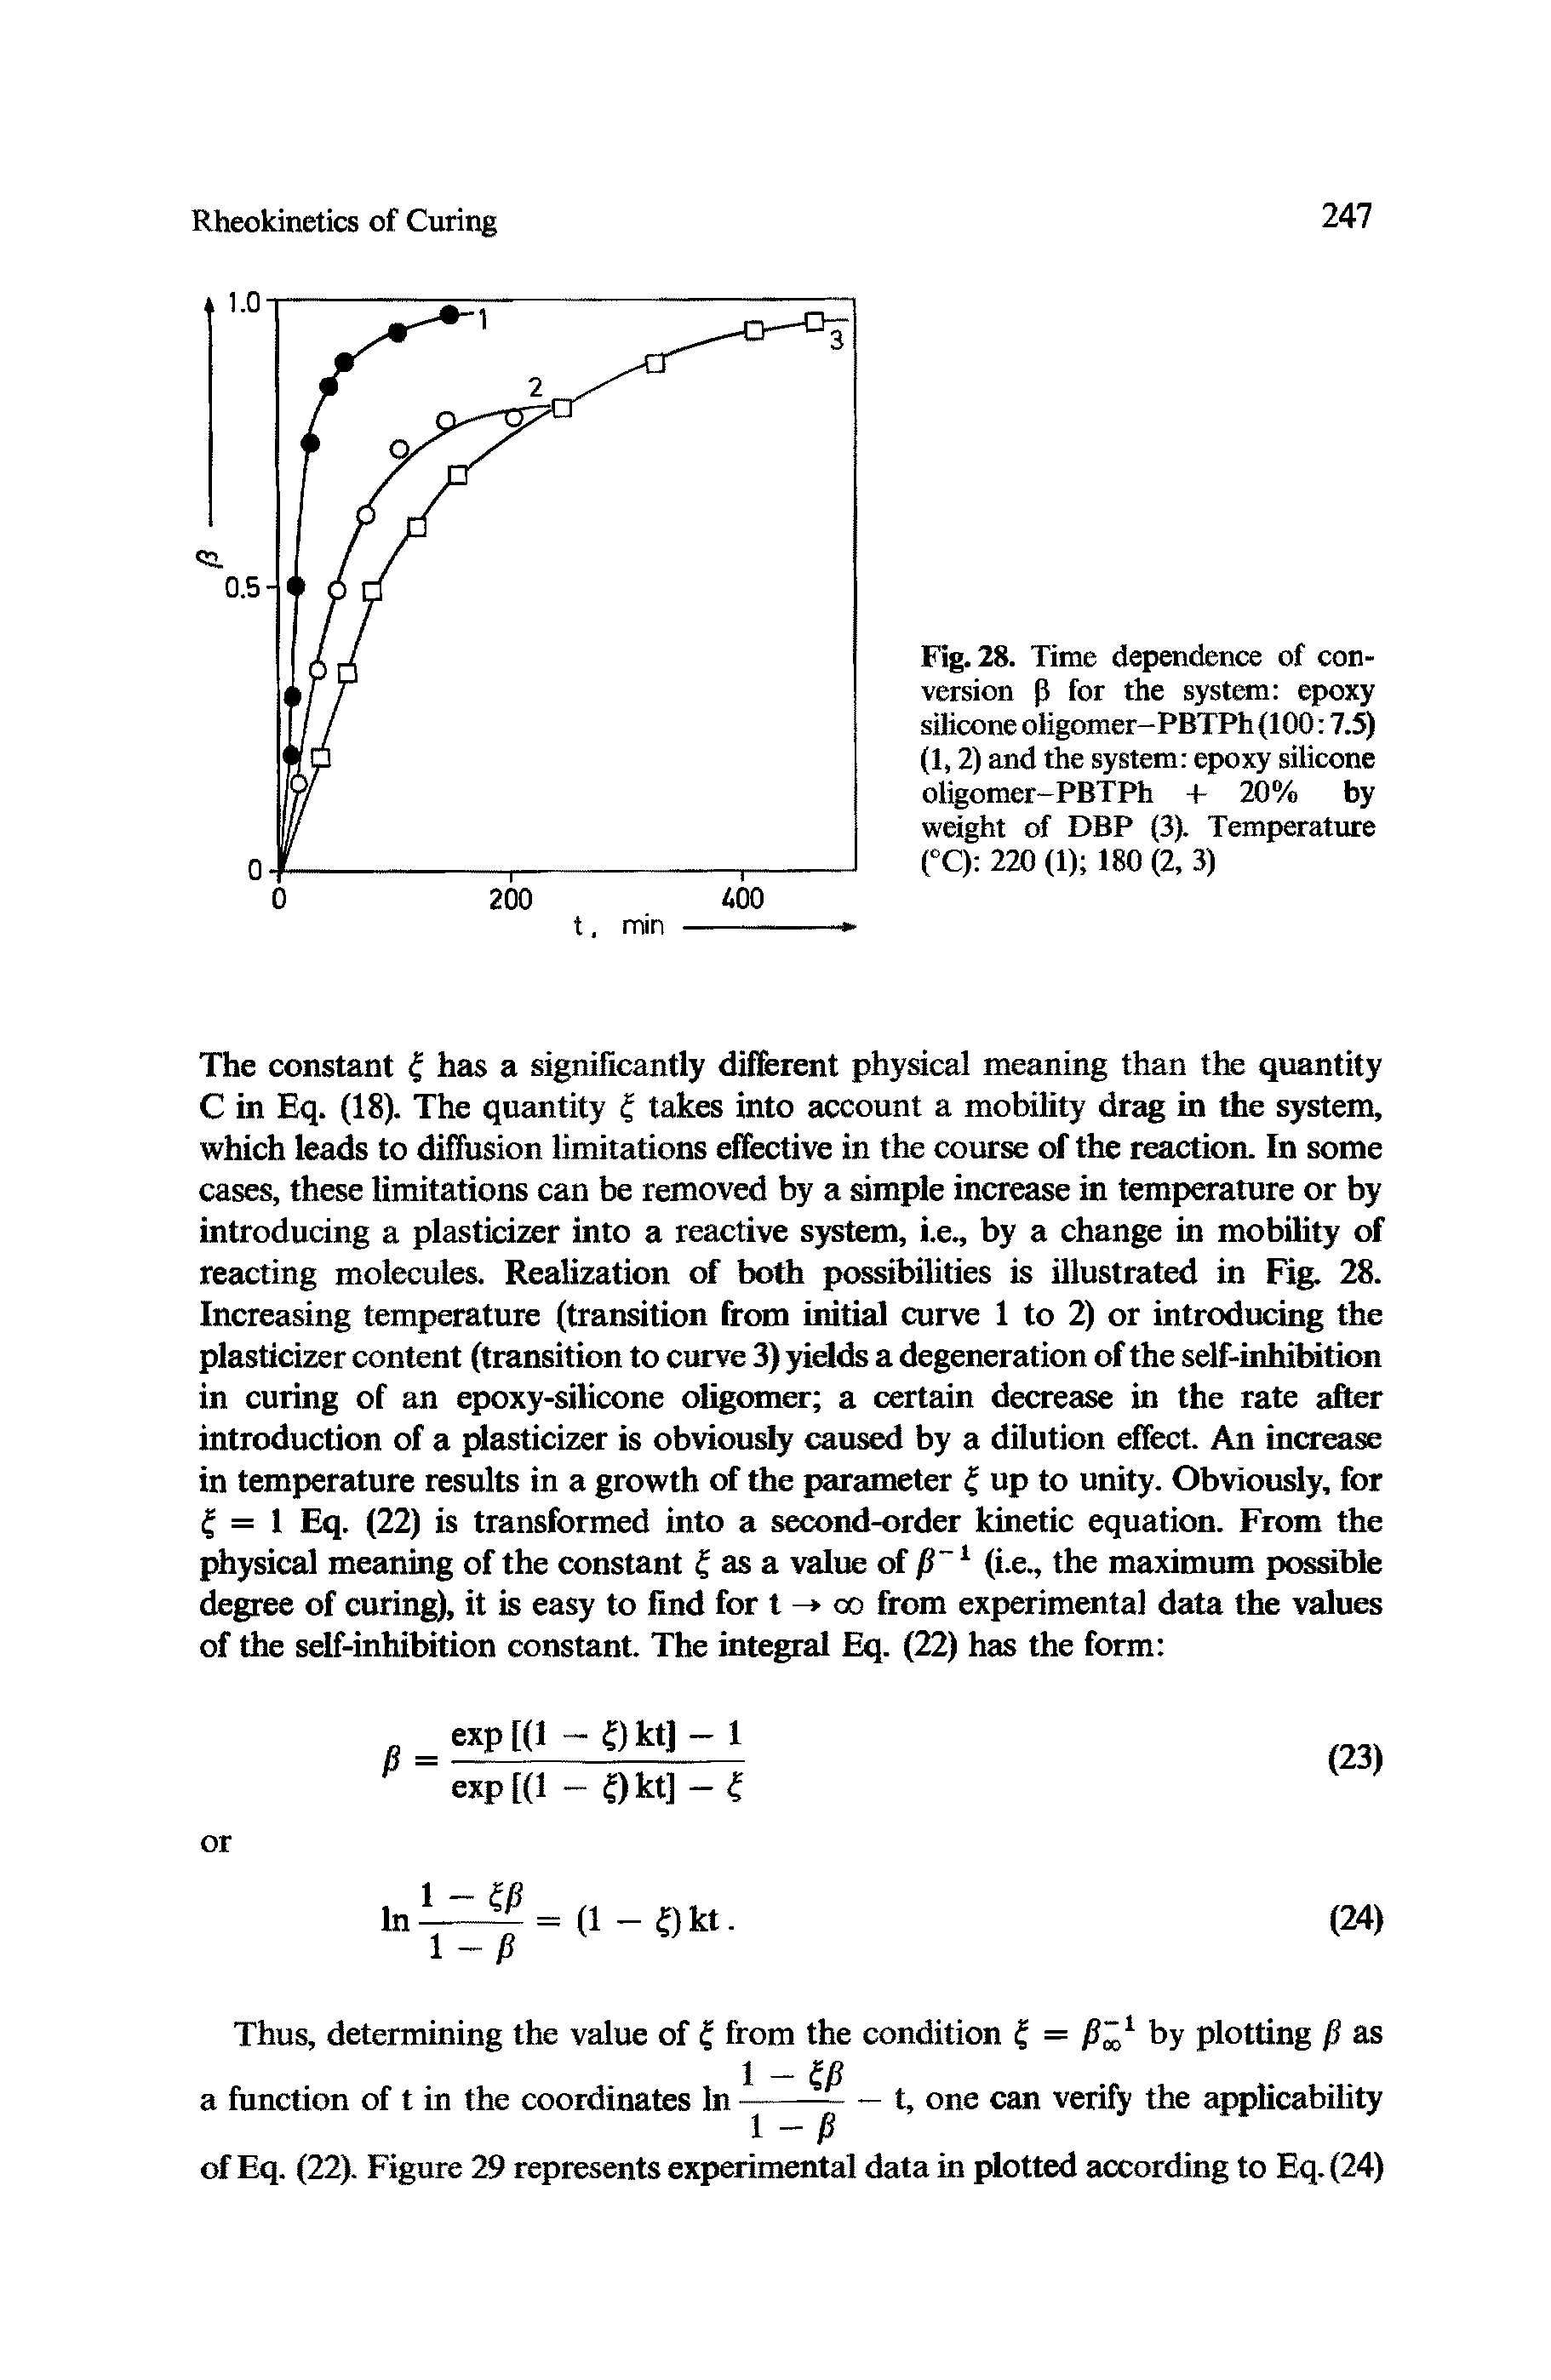 Fig. 28. Time dependence of conversion p for the system epoxy silicone oligomer-PBTPh (100 7.5) (1,2) and the system epoxy silicone oligomer-PBTPh + 20% by weight of DBP (3). Temperature (°C) 220 (1) 180 (2, 3)...